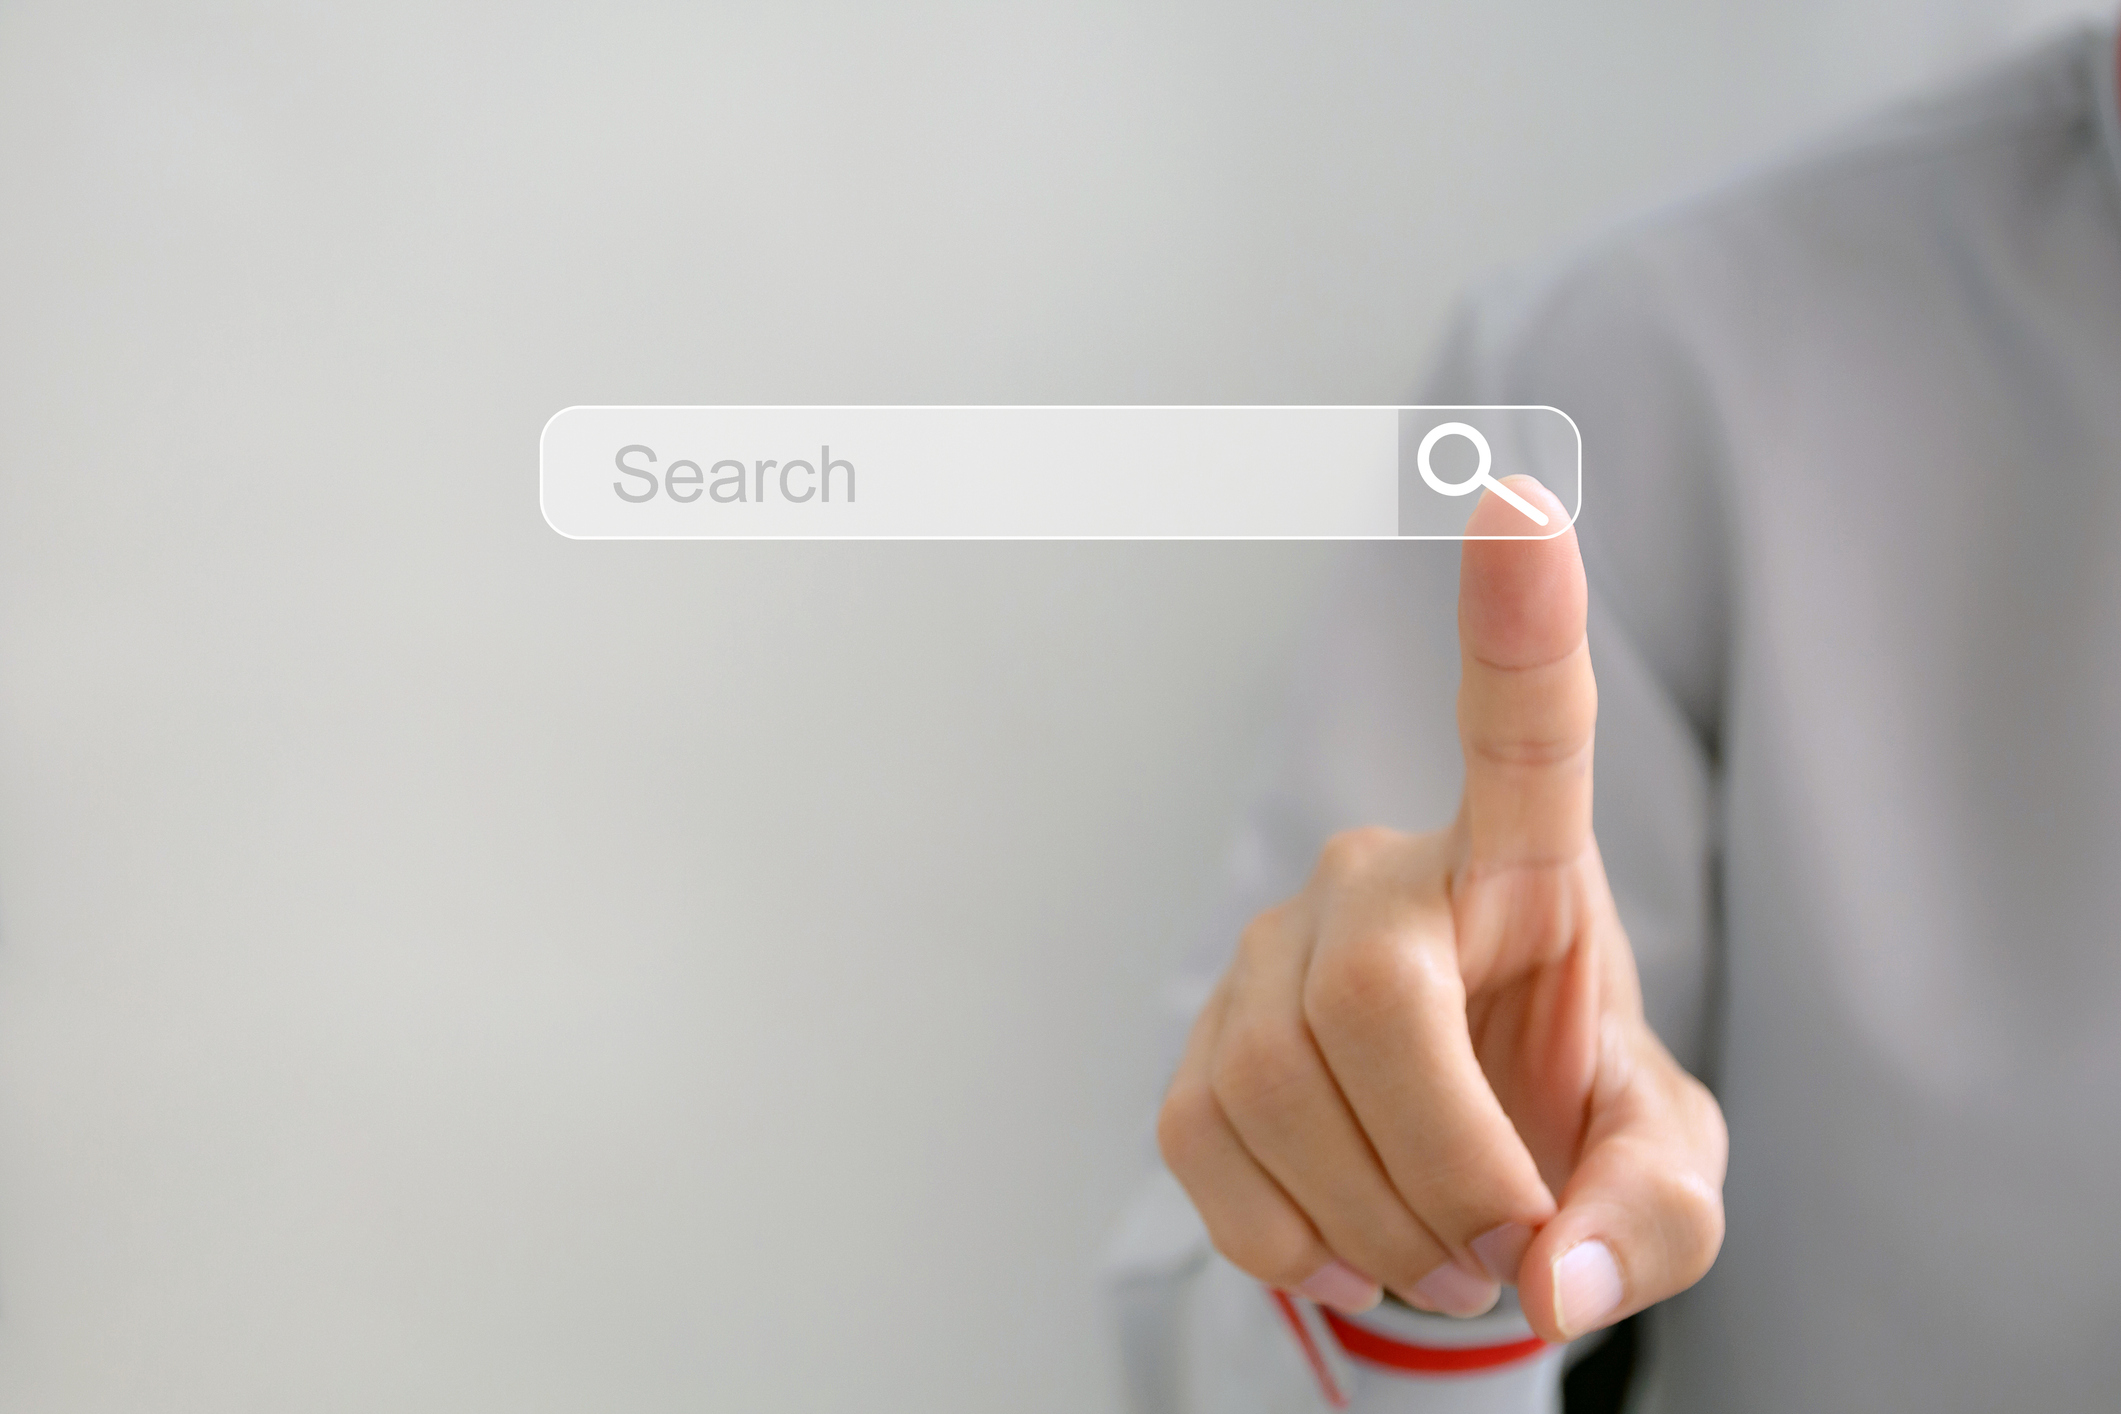 SEO can boost your search visibility